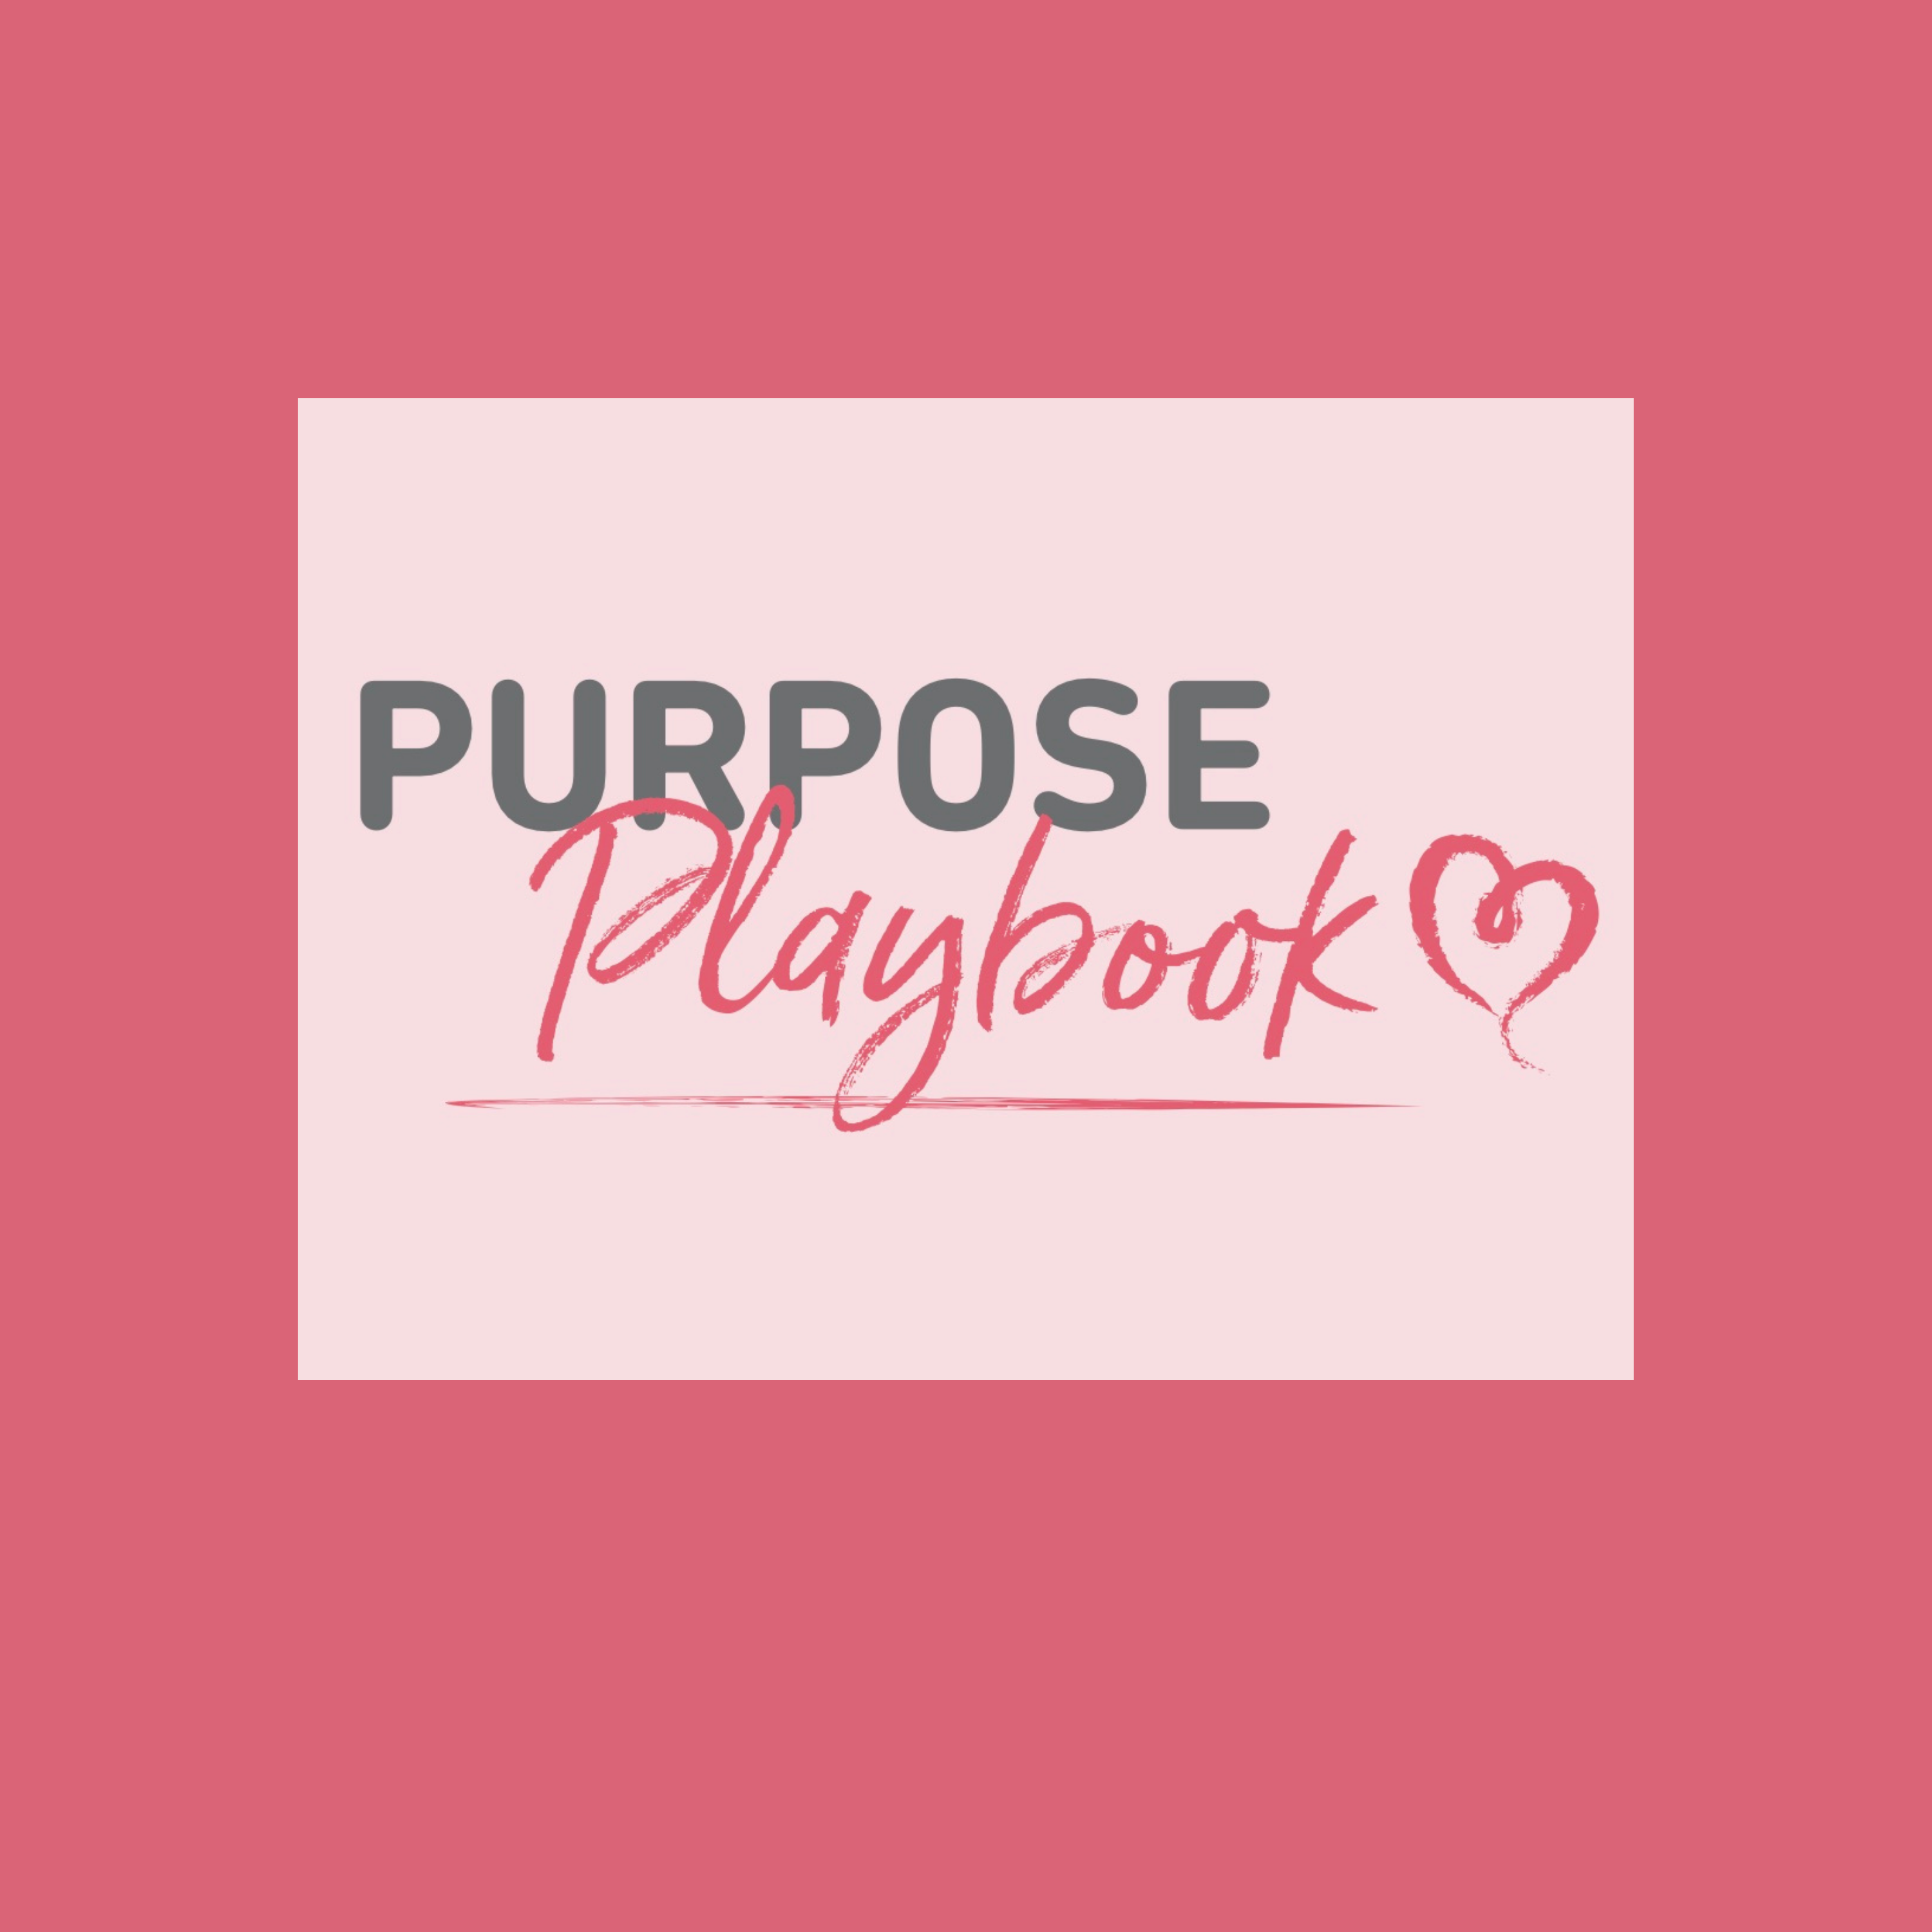 Introduction to the Playbook